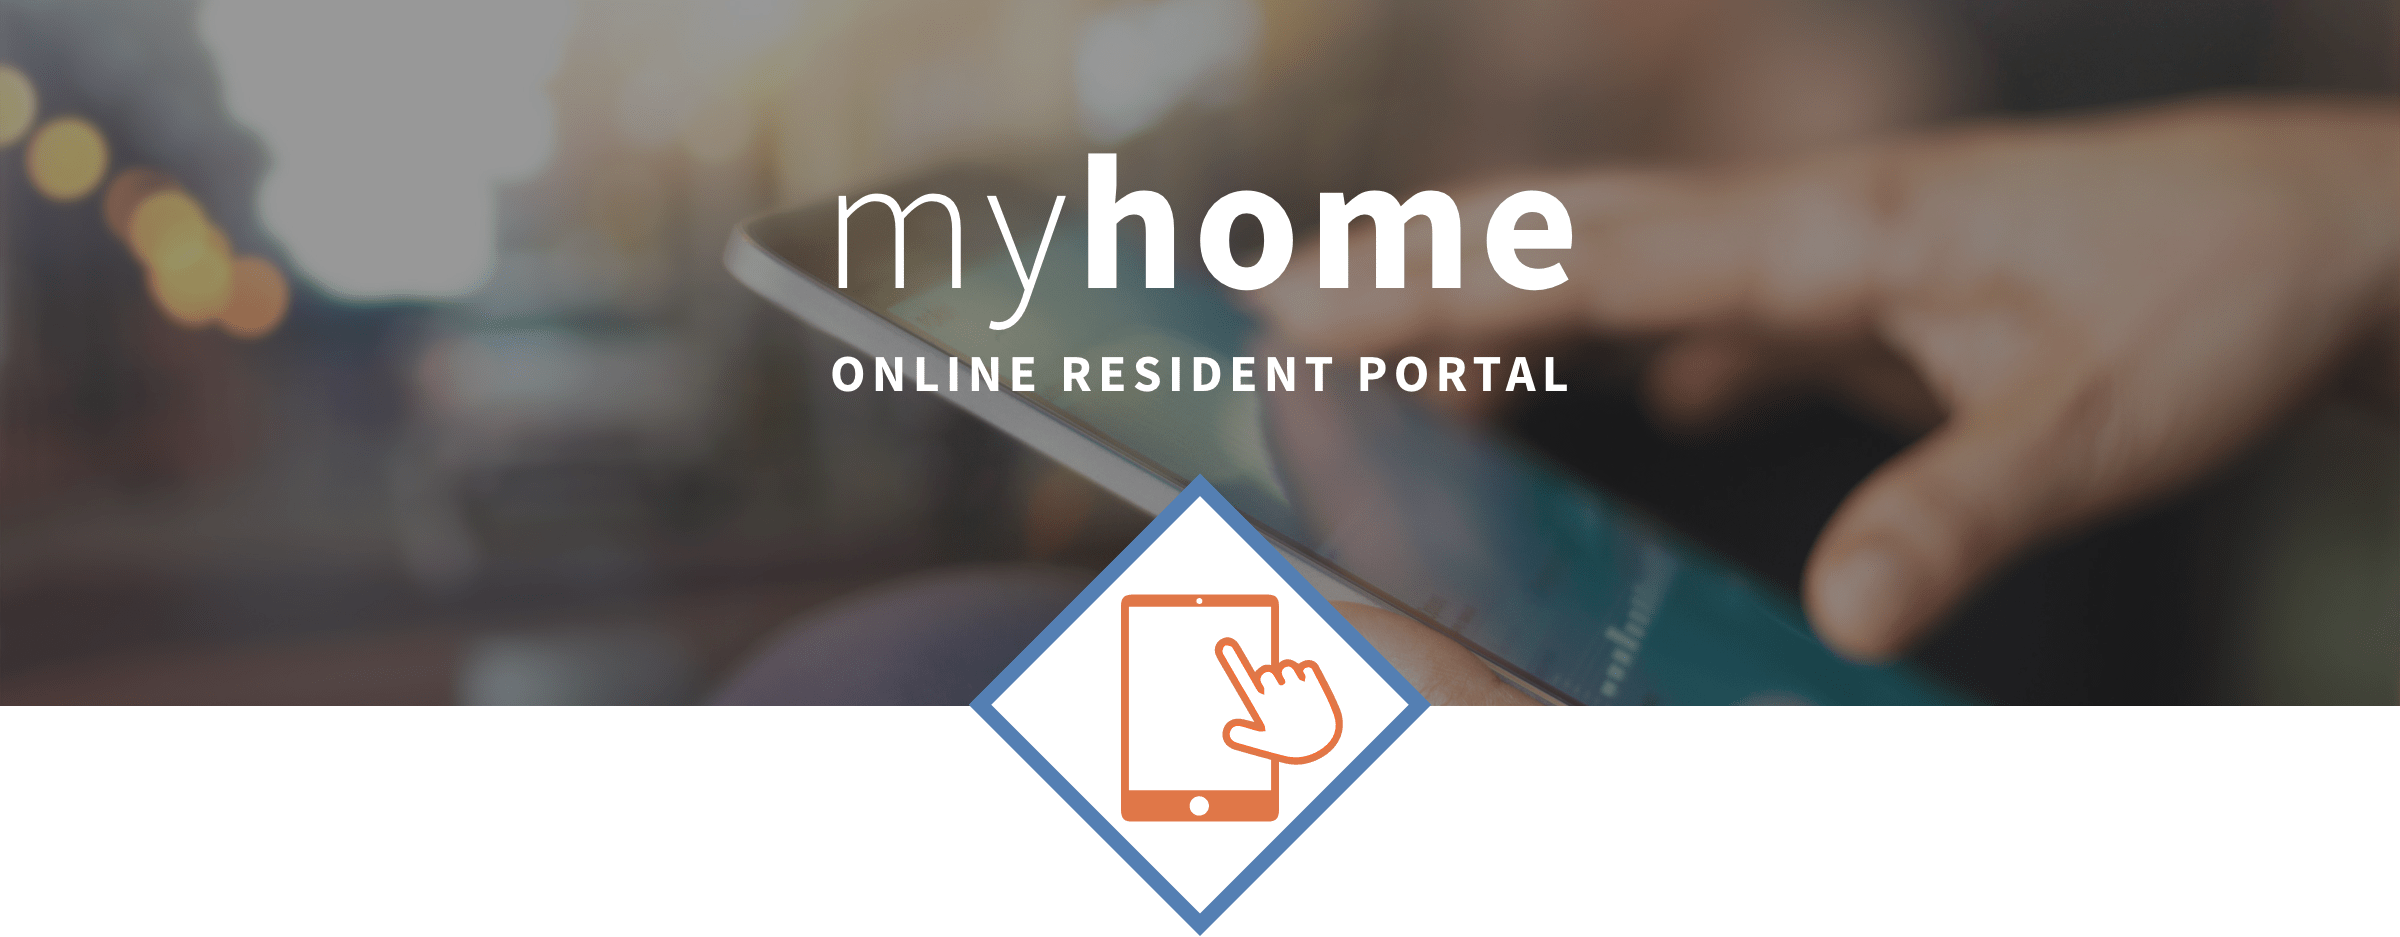 MyHome Online Resident Portal